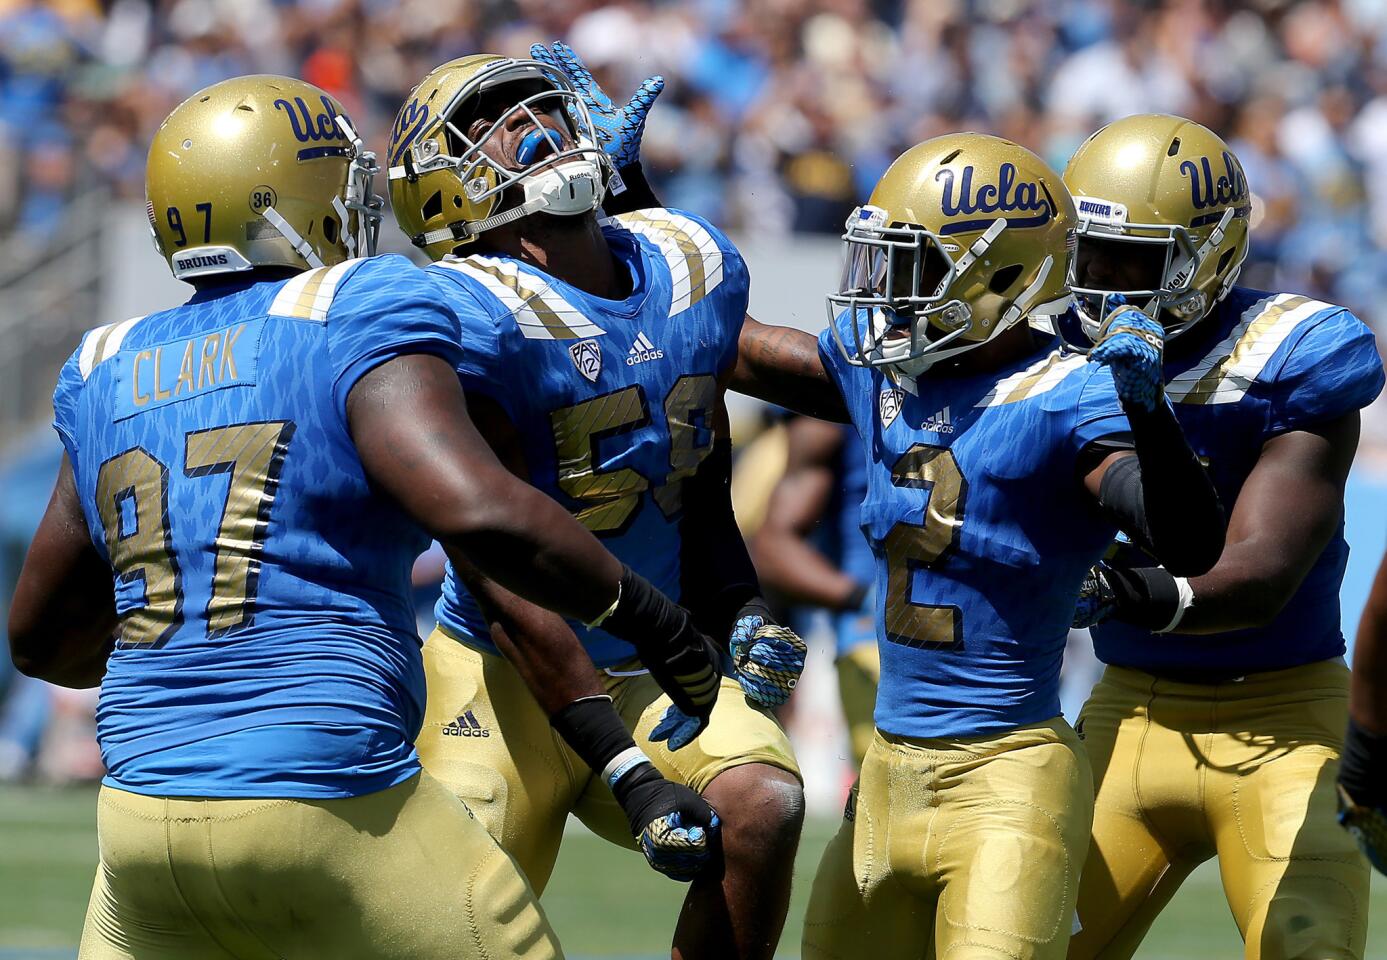 For nearly all UCLA football players, facing Oregon State is a new thing